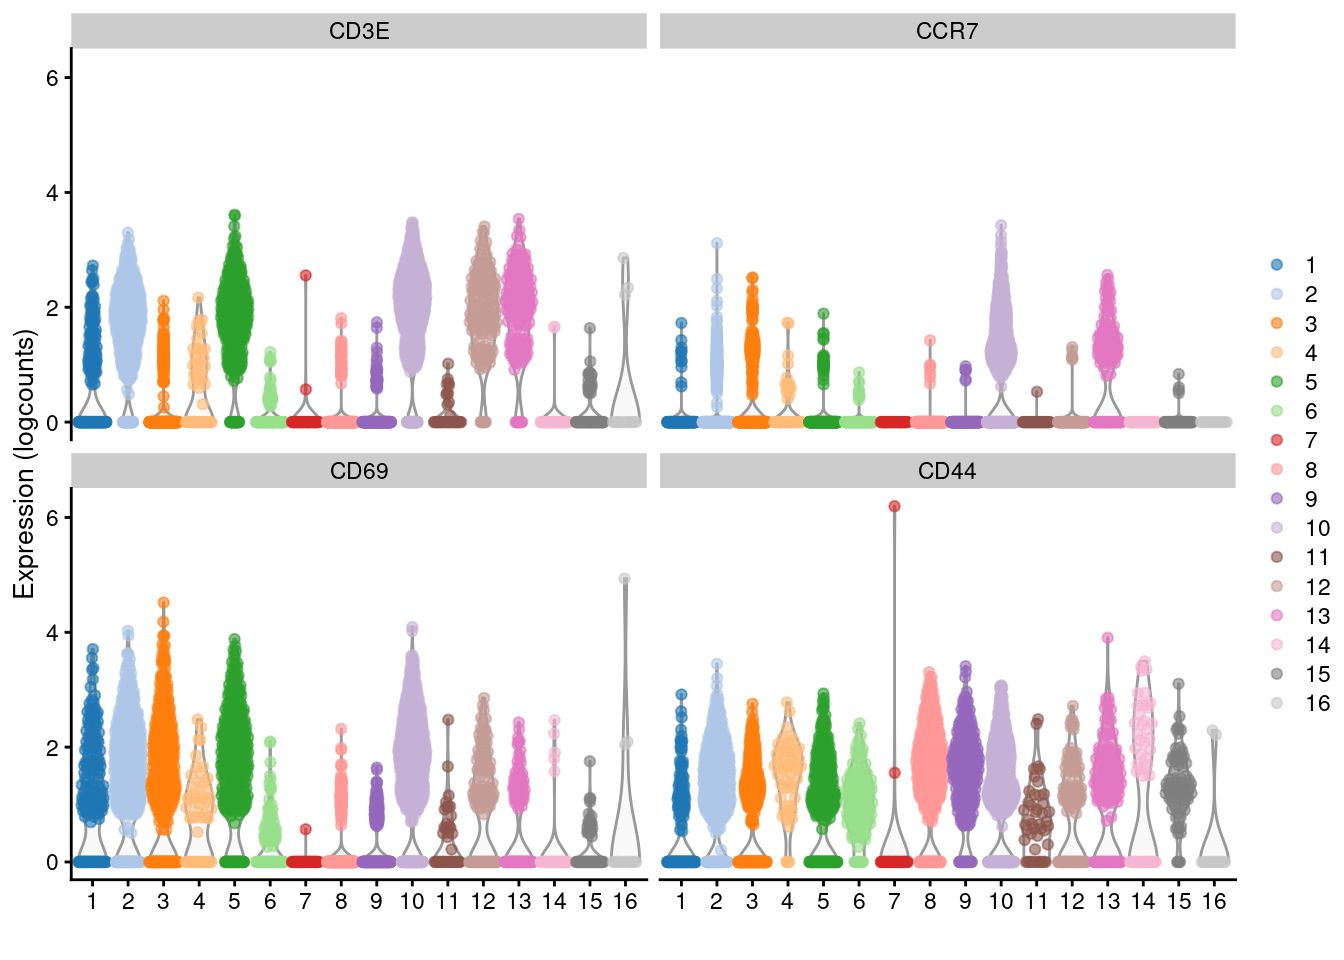 Distribution of log-normalized expression values for several T cell markers within each cluster in the 10X PBMC dataset. Each cluster is color-coded for convenience.